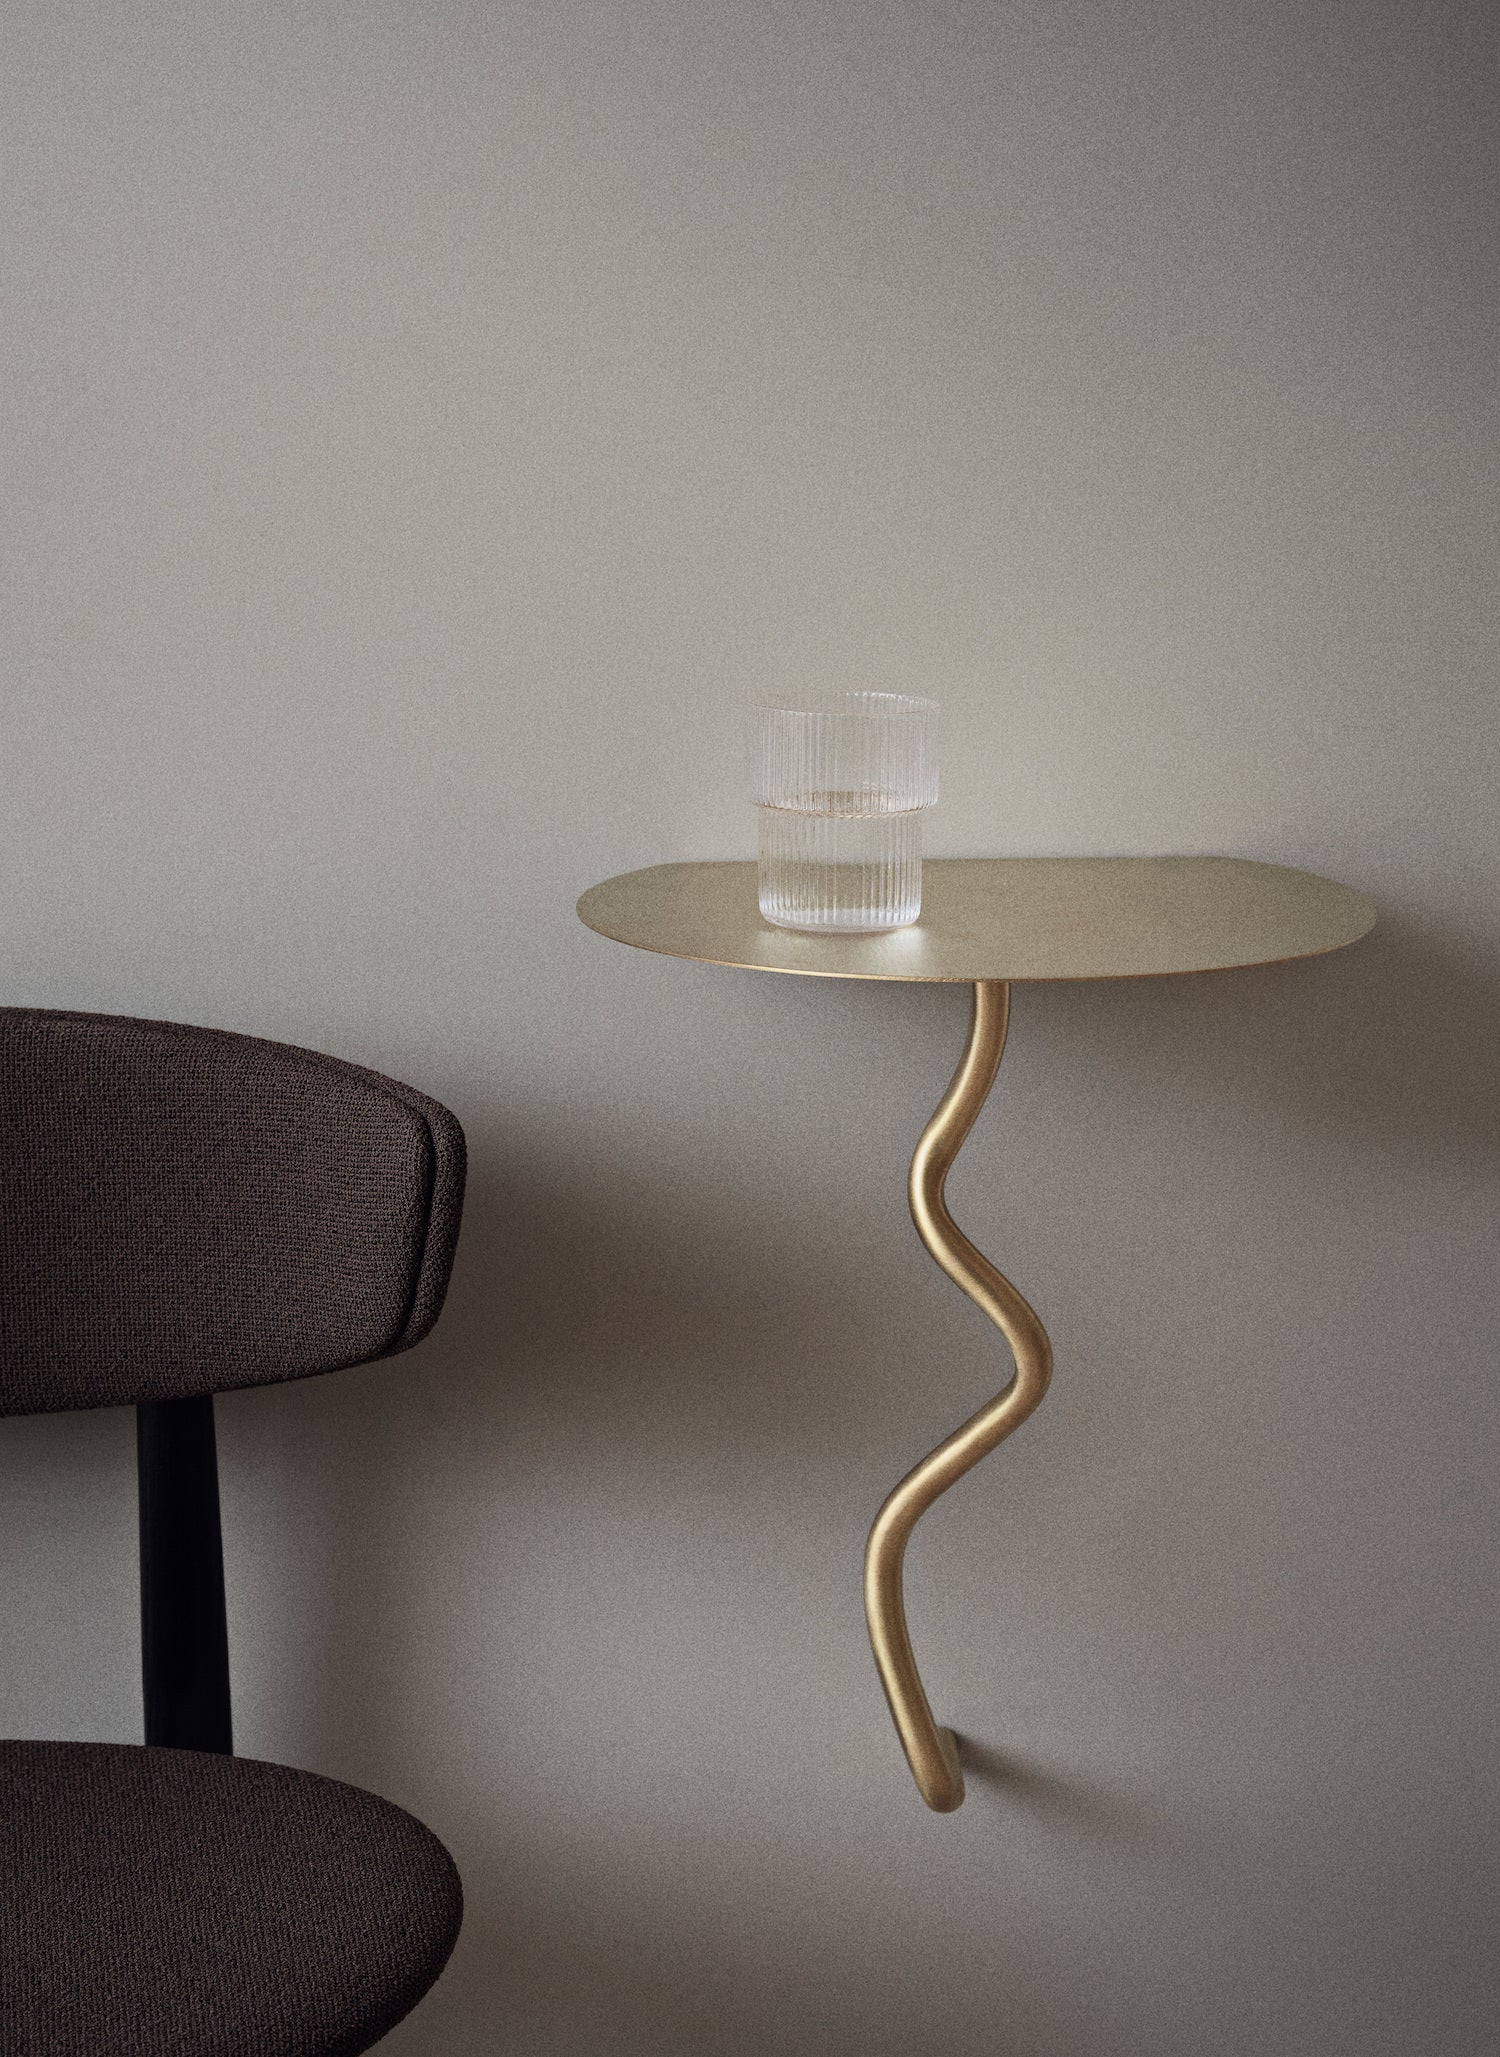 floating brass wall mounted side table from fermLIVING.